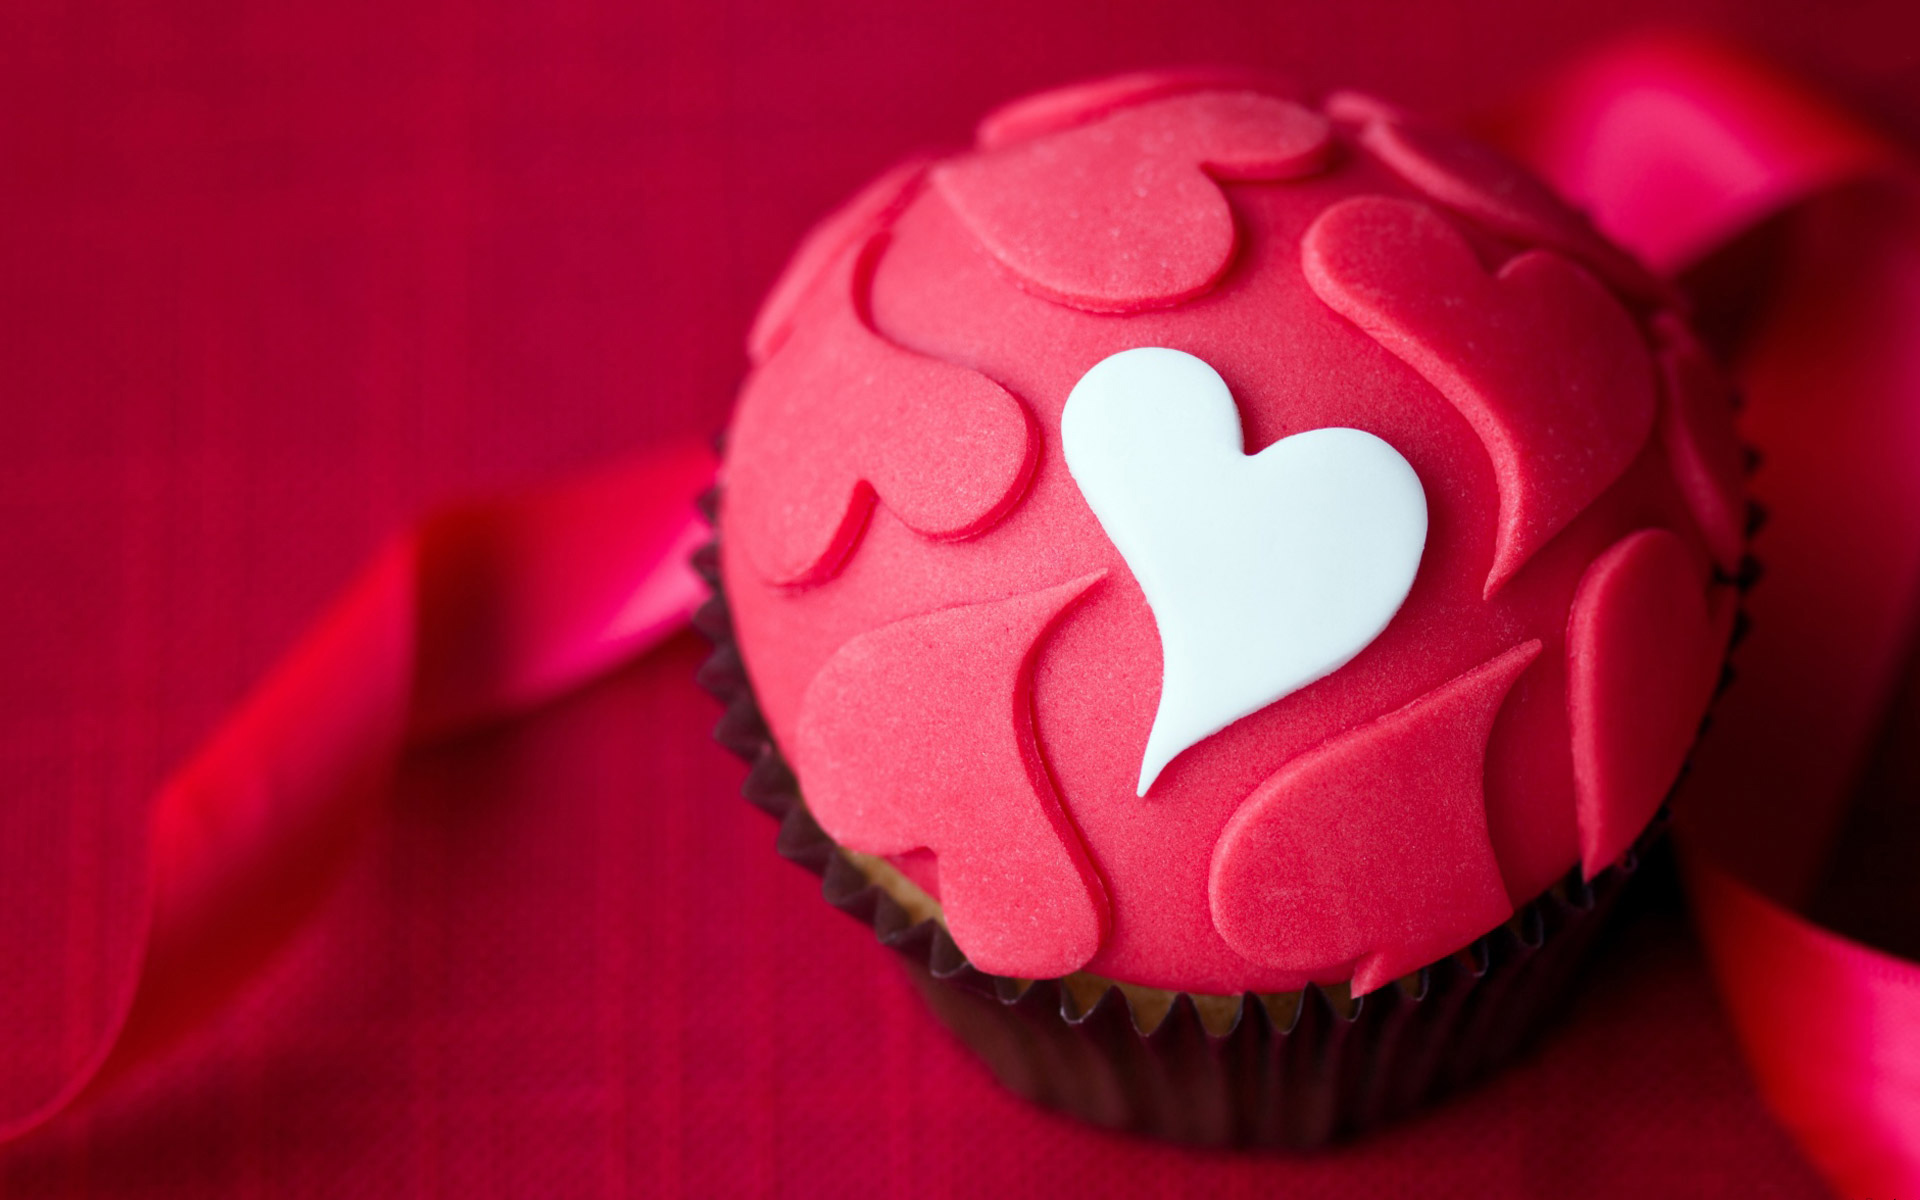 wallpaper download hd love,pink,red,baking cup,heart,valentine's day